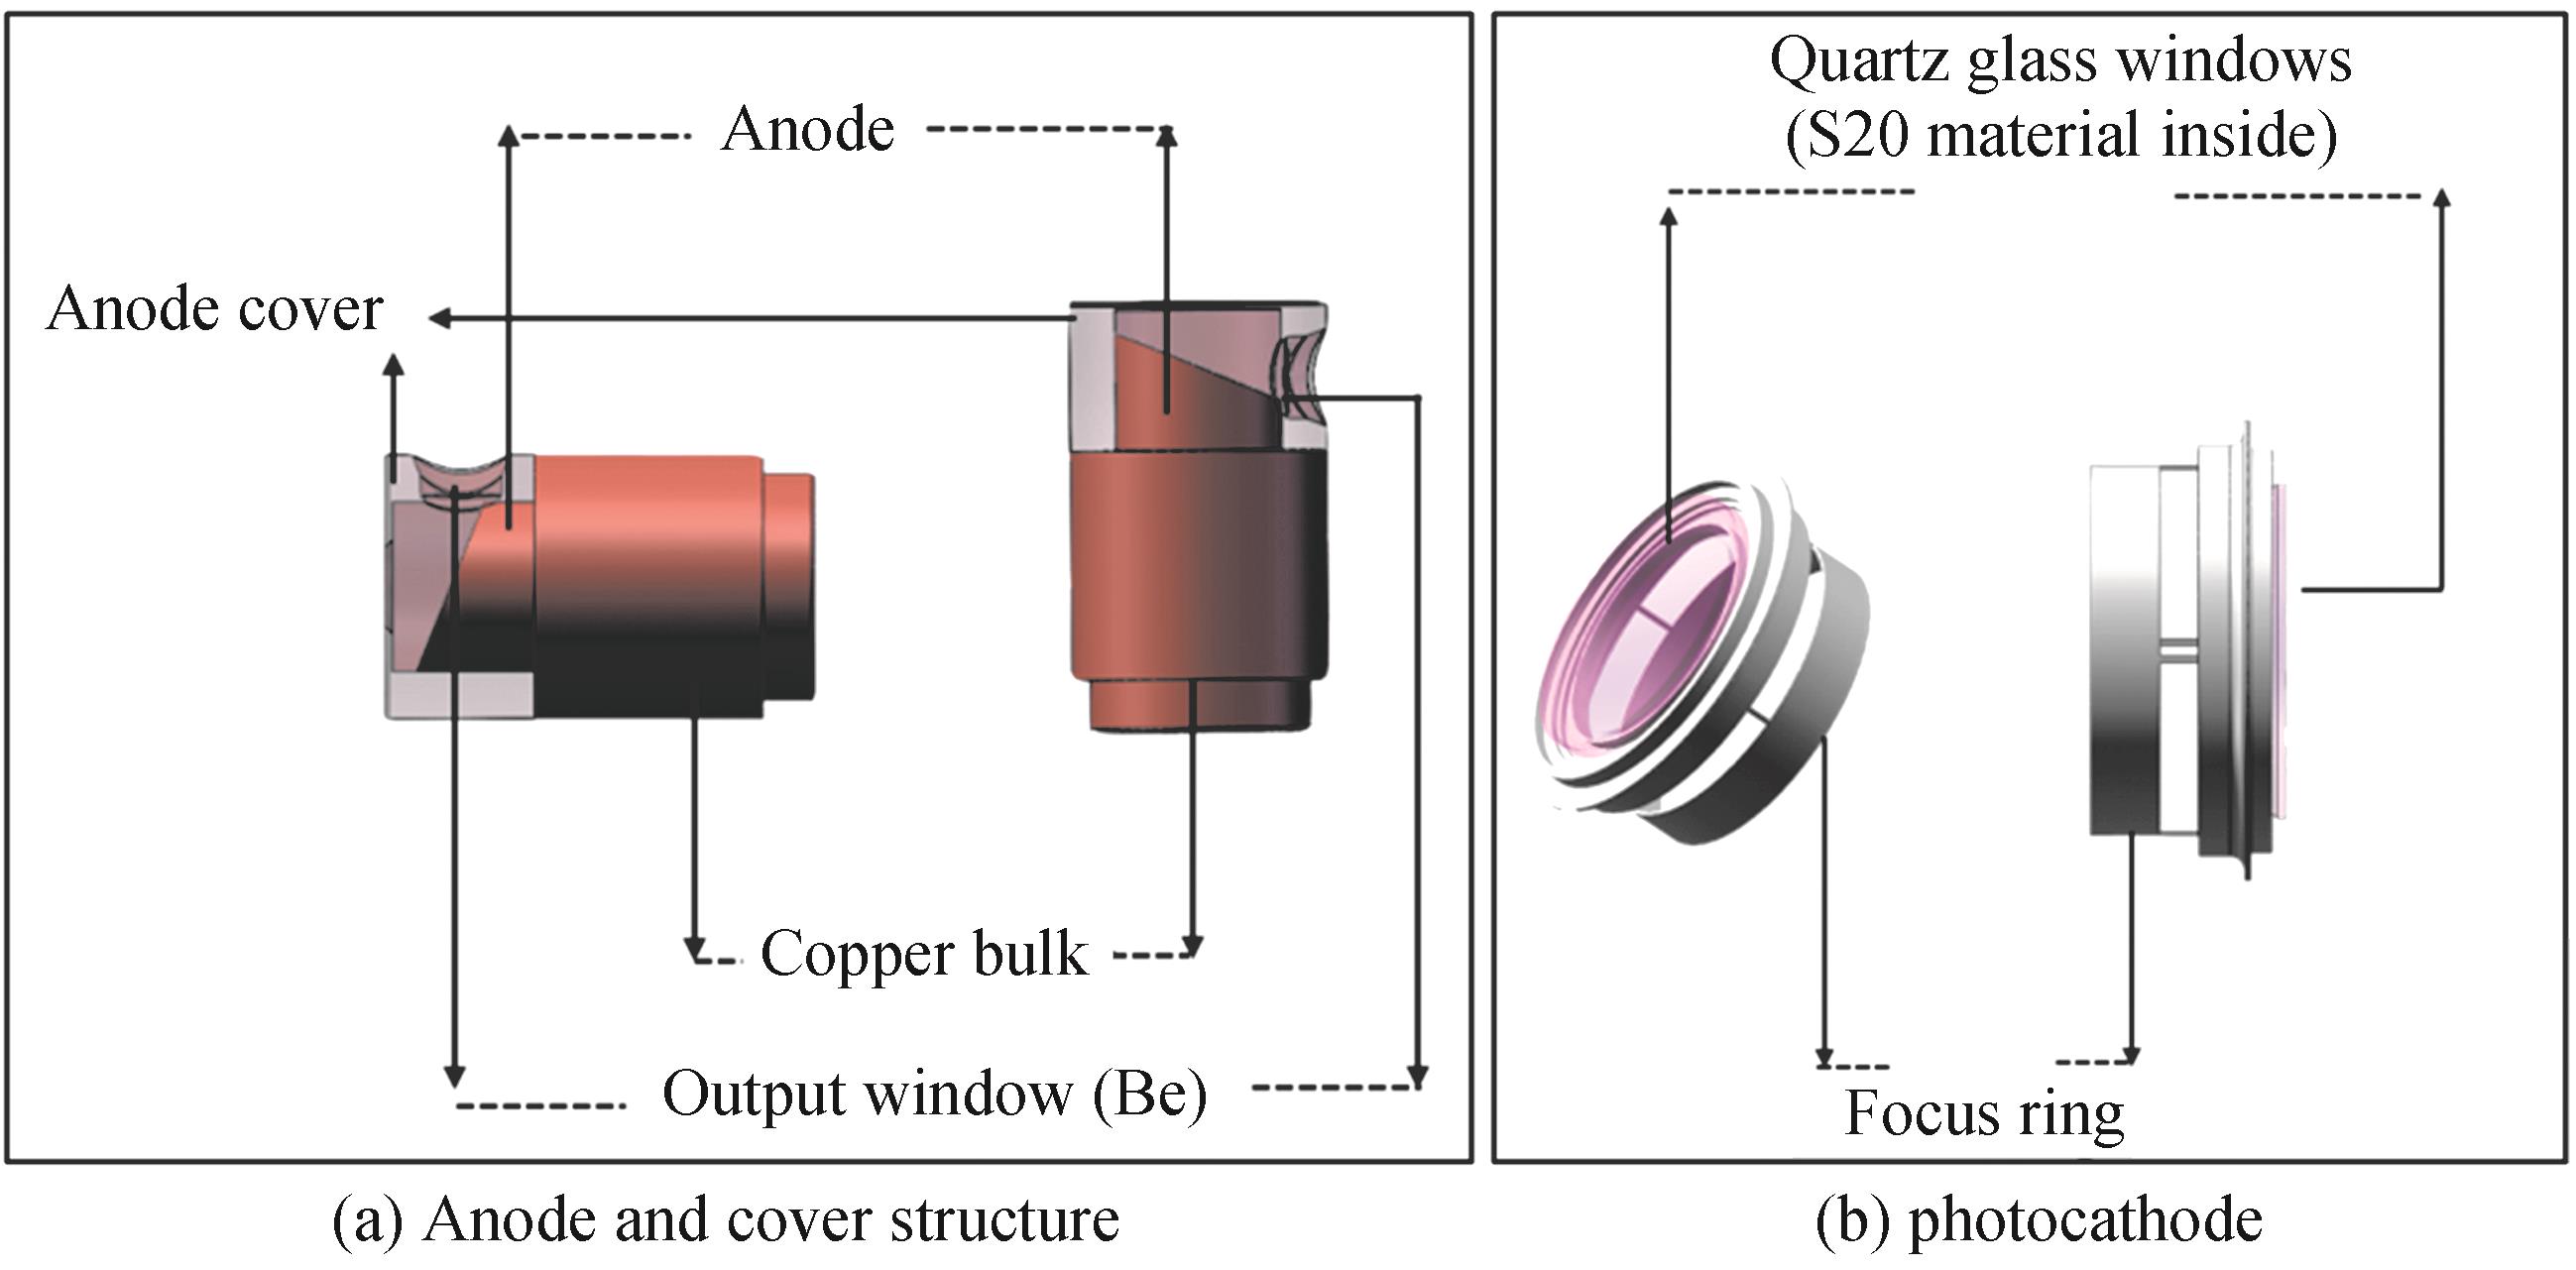 Anode and photocathode parts of light-controlled pulsed X-ray tube